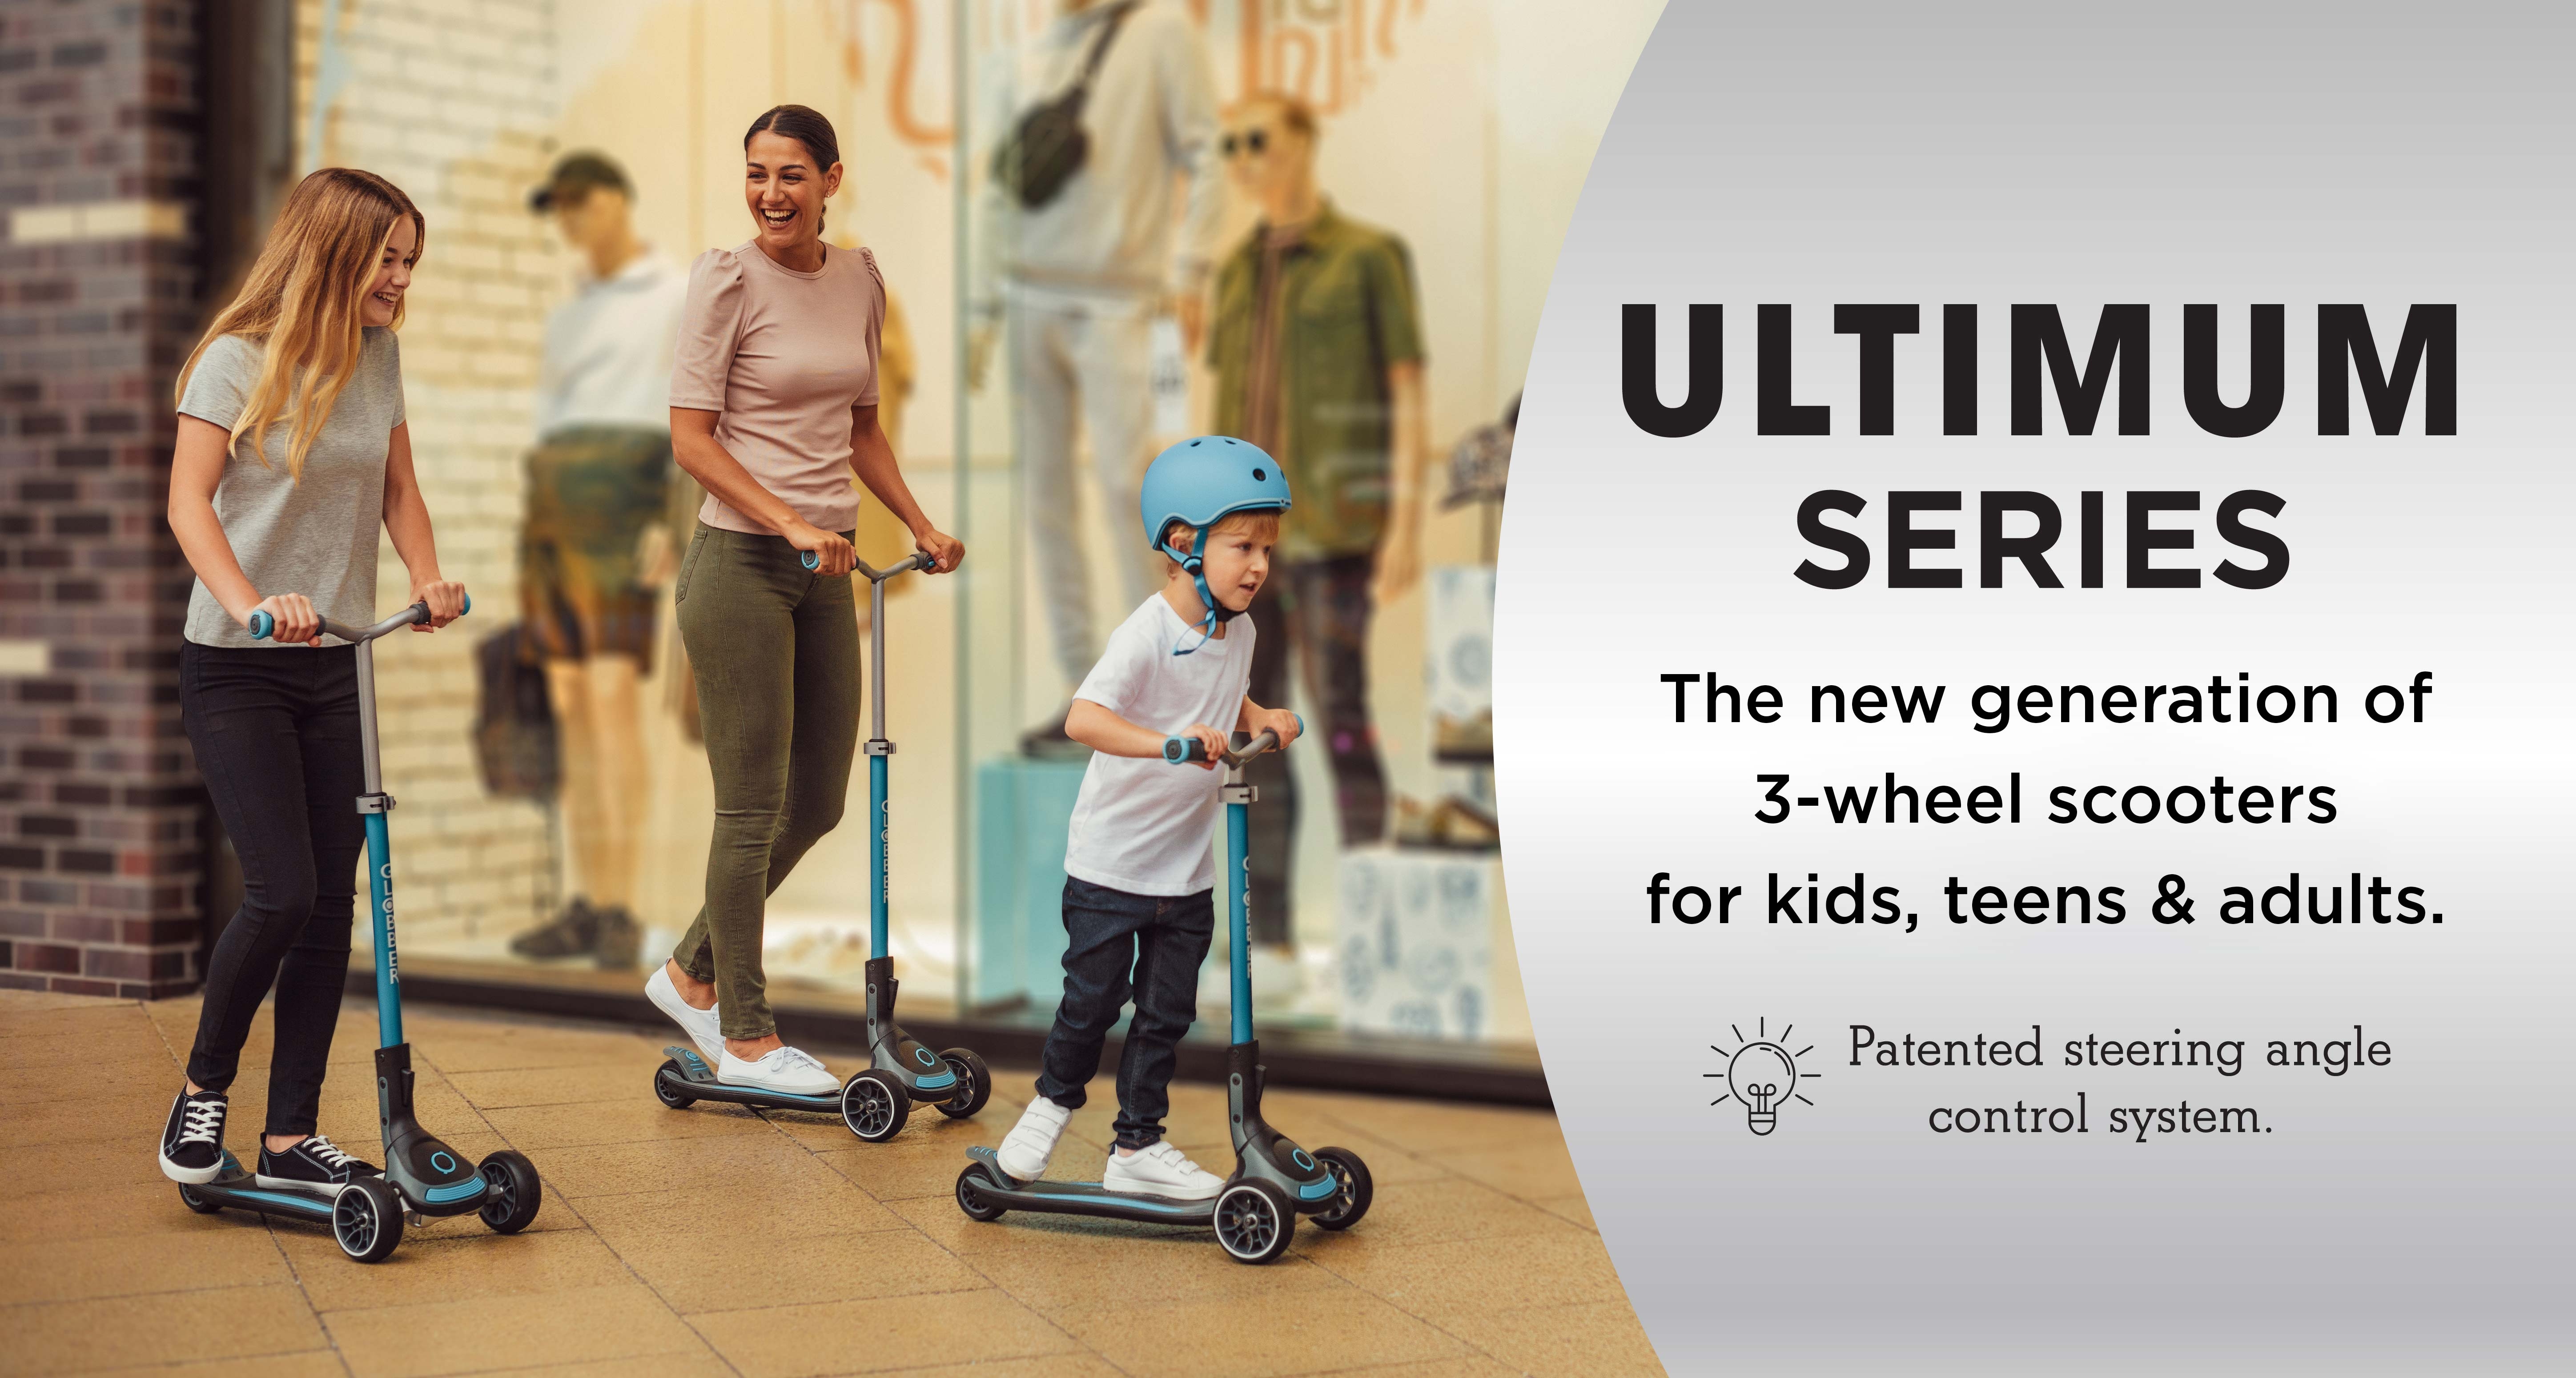 The new generation of 3-wheel scooters for kids & teens